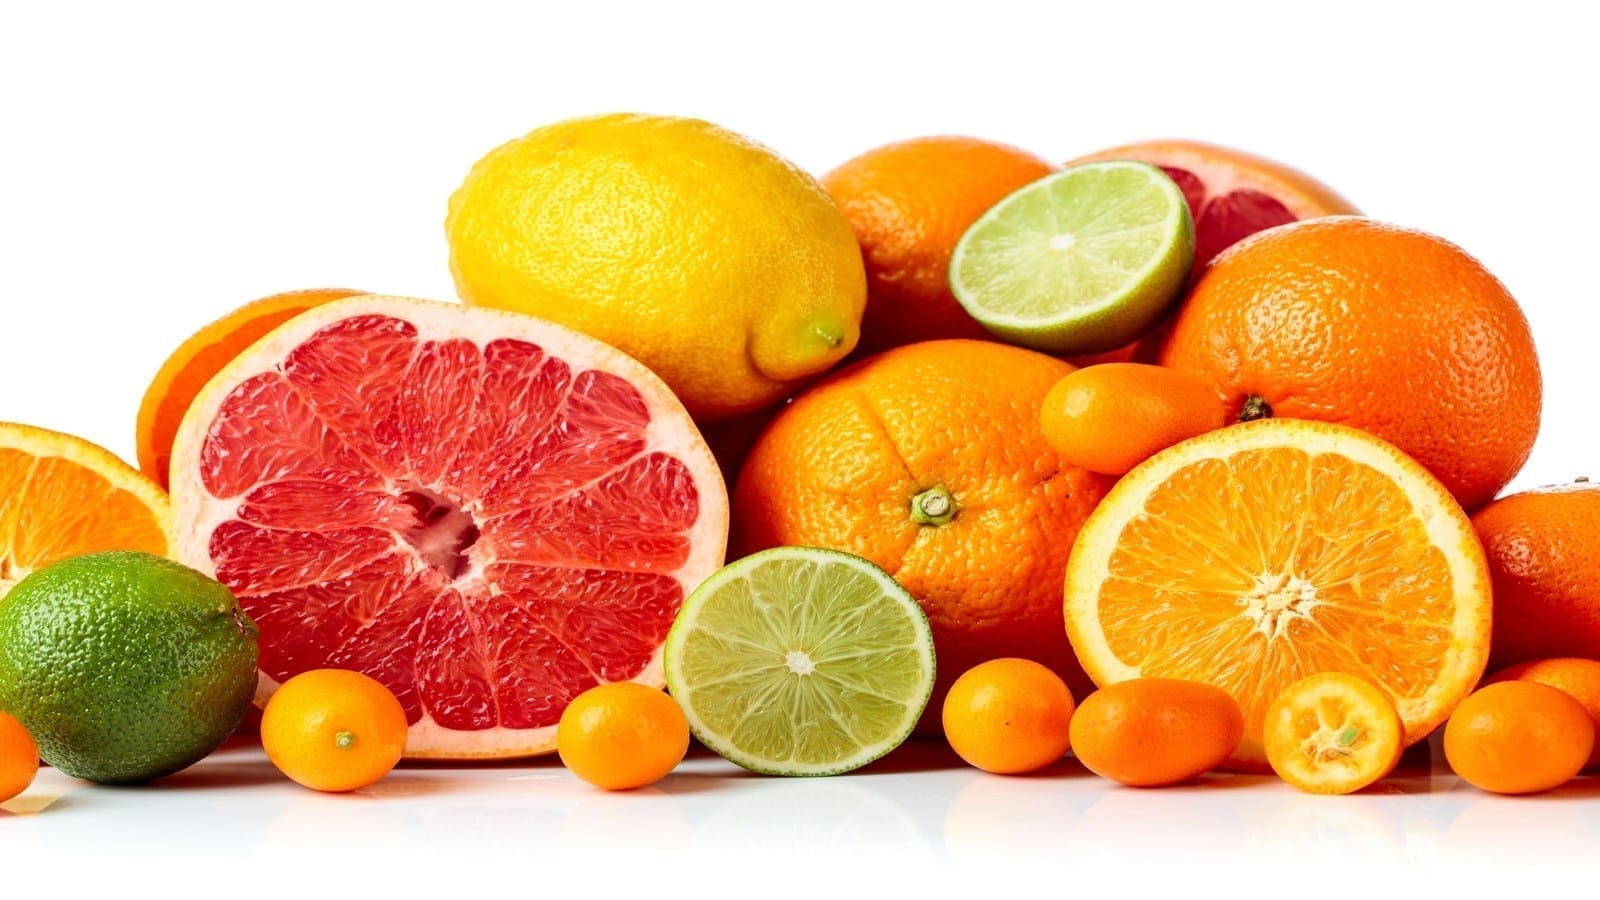 Citrus fiber to be incorporated as food additive as demand for clean label rises